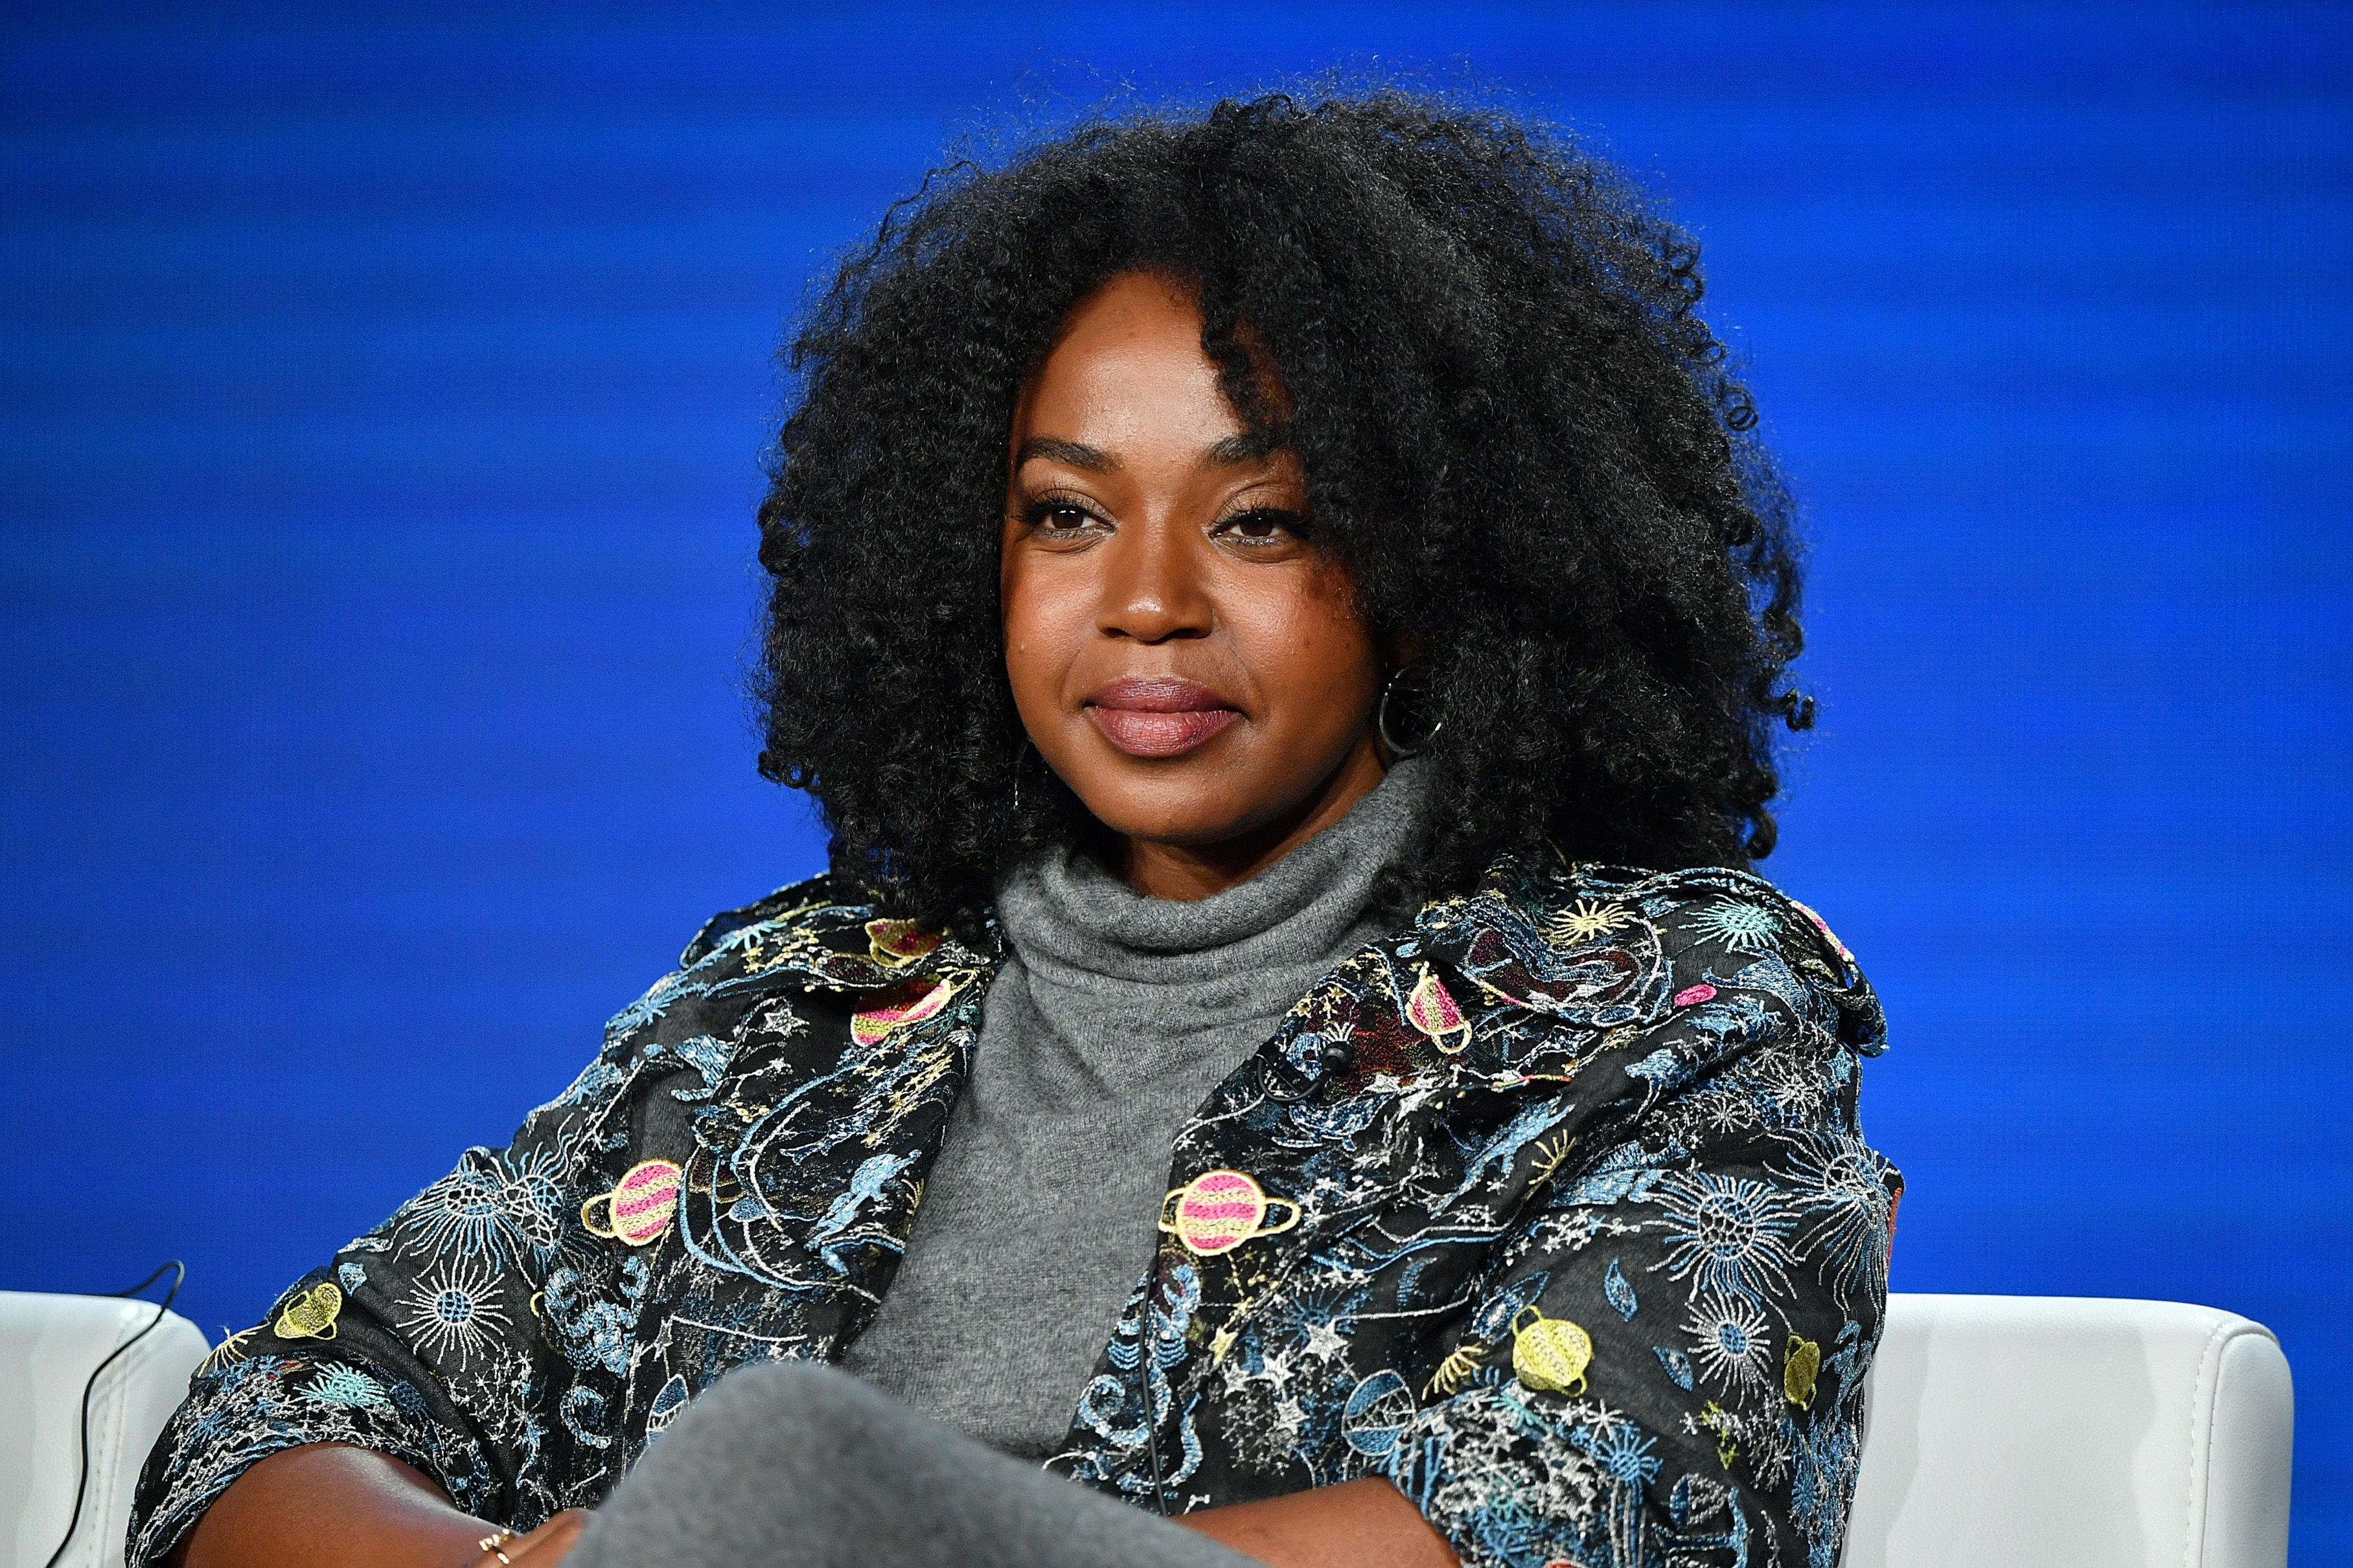 Jerrika Hinton talking about 'Hunters' during the 2020 Winter TCA Tour in Pasadena in January 2020 | Source: Getty Images